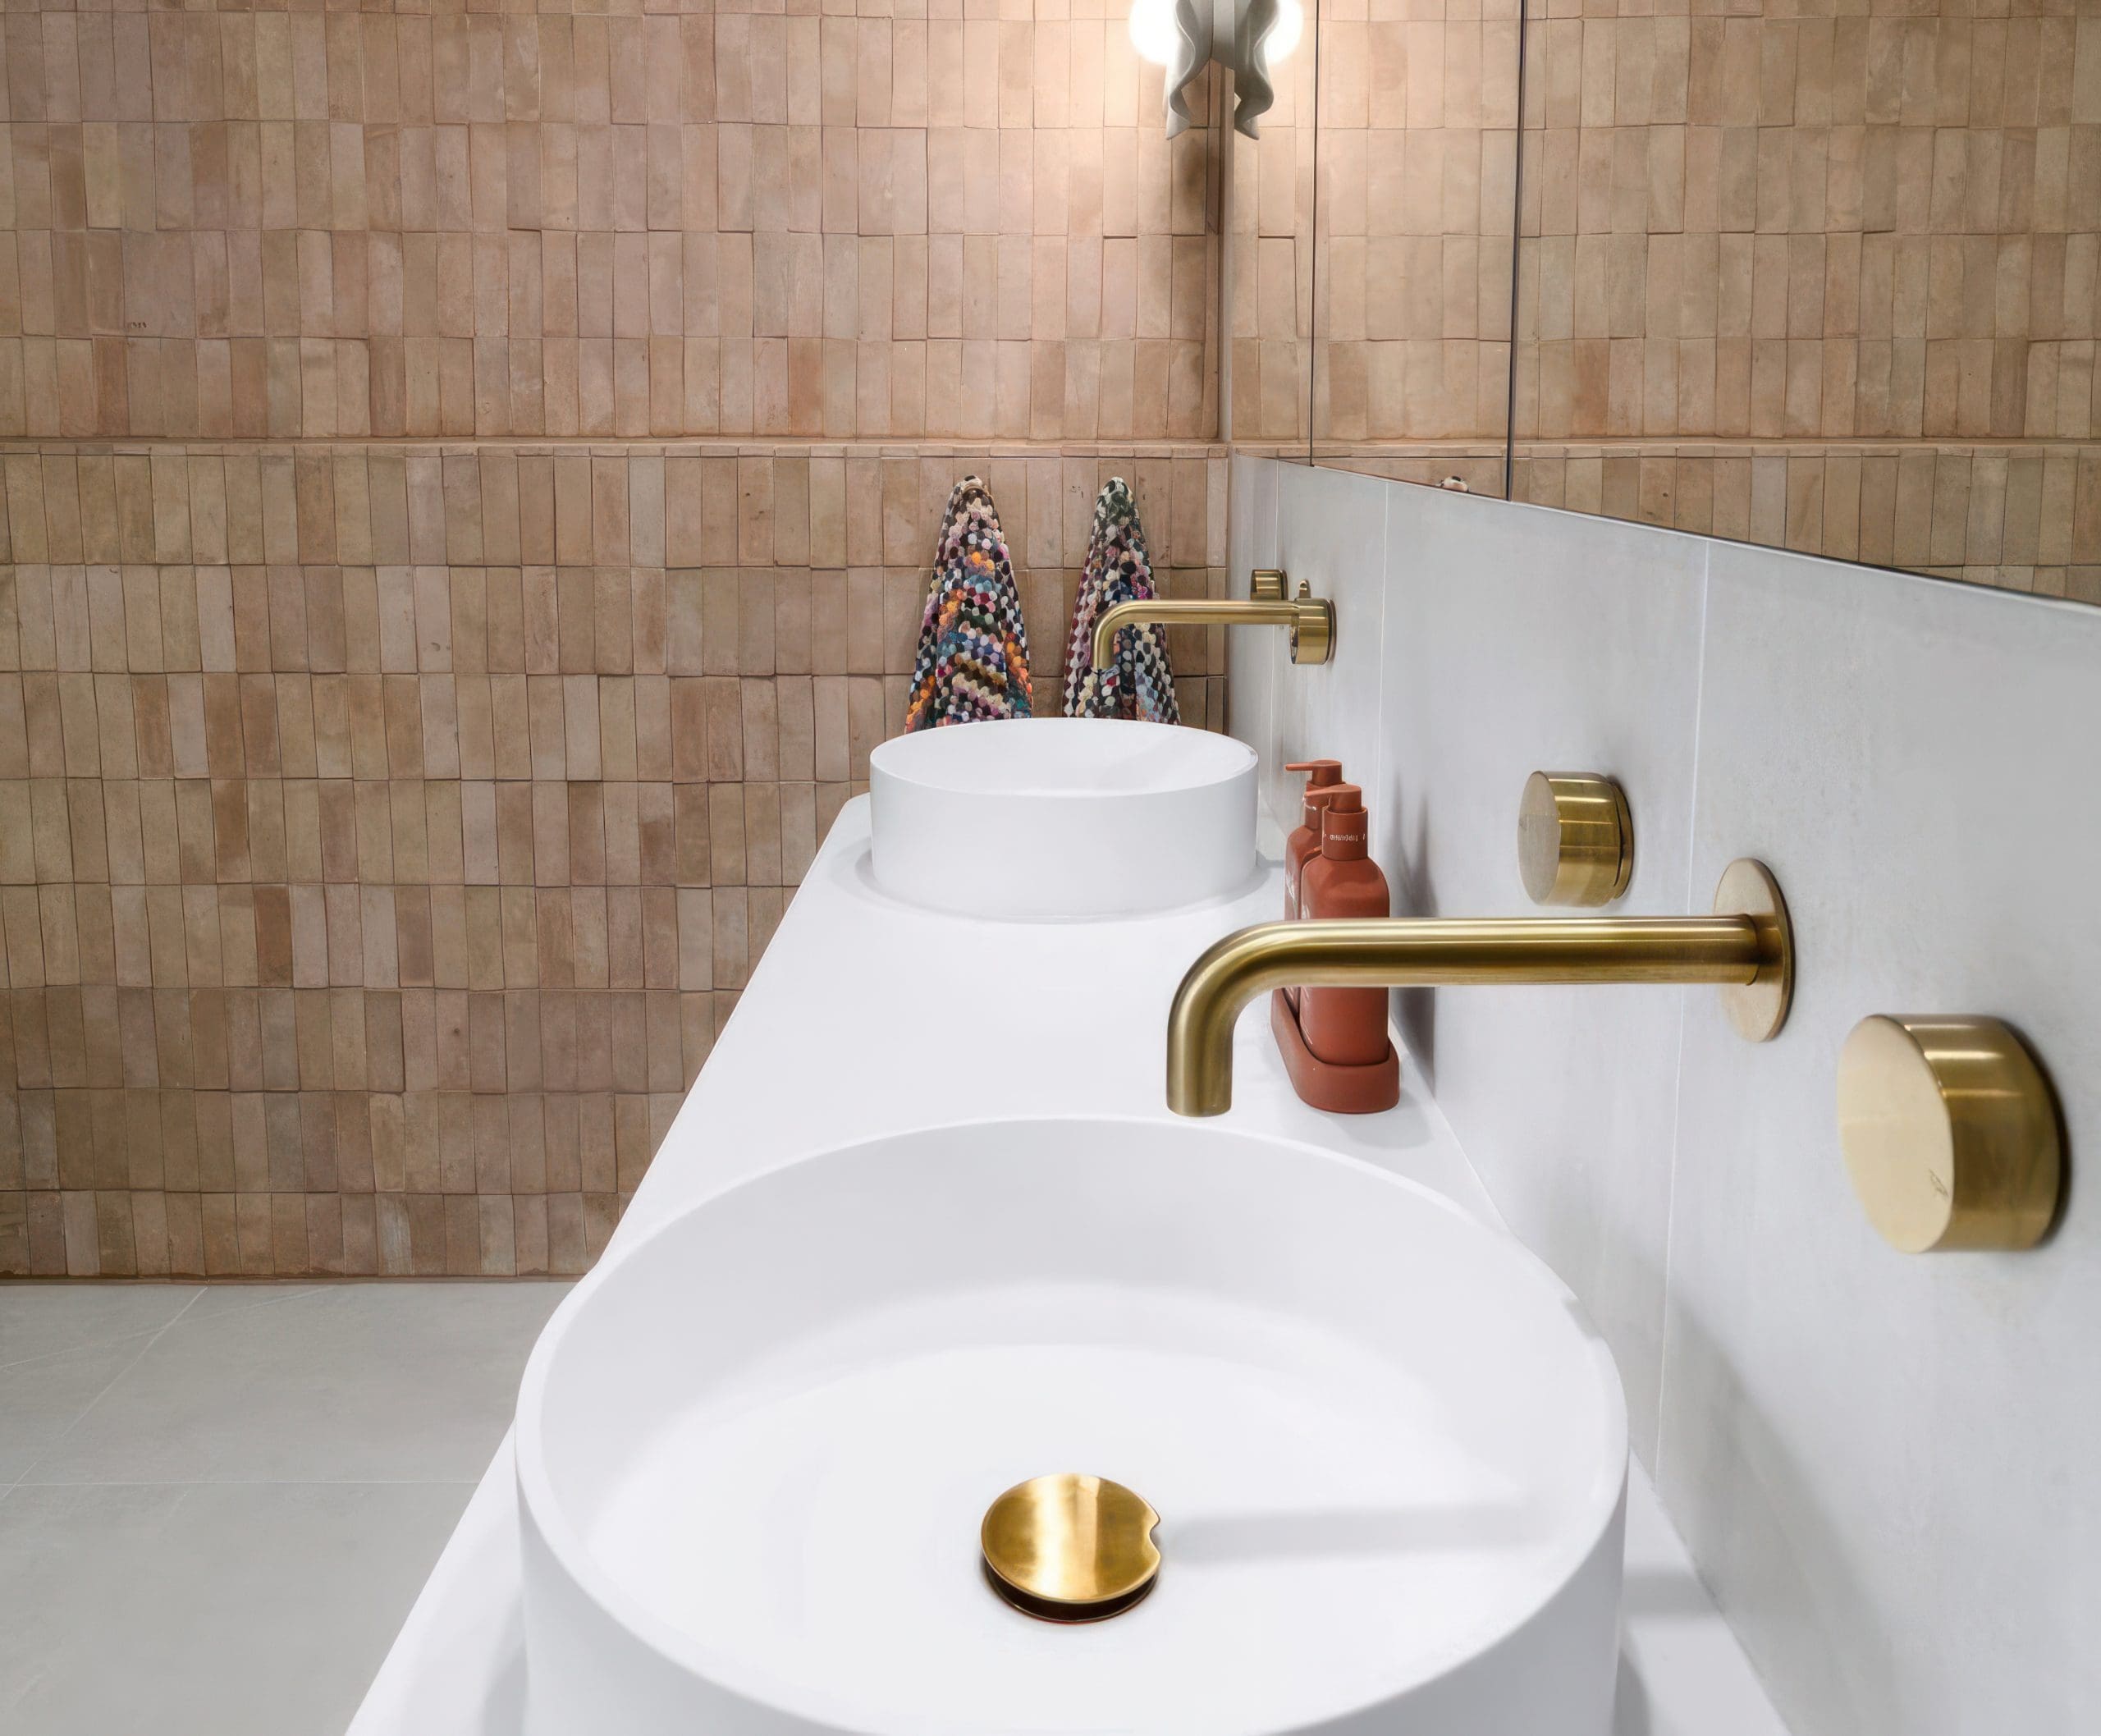 TAHA TERRACOTTA BATONS_RMS TRADERS_NATURAL STONE PAVER BATHROOM TILE SUPPLIER FEATURE WALL TEXTURED TILE SUPPLIER MELBOURNE (8)x